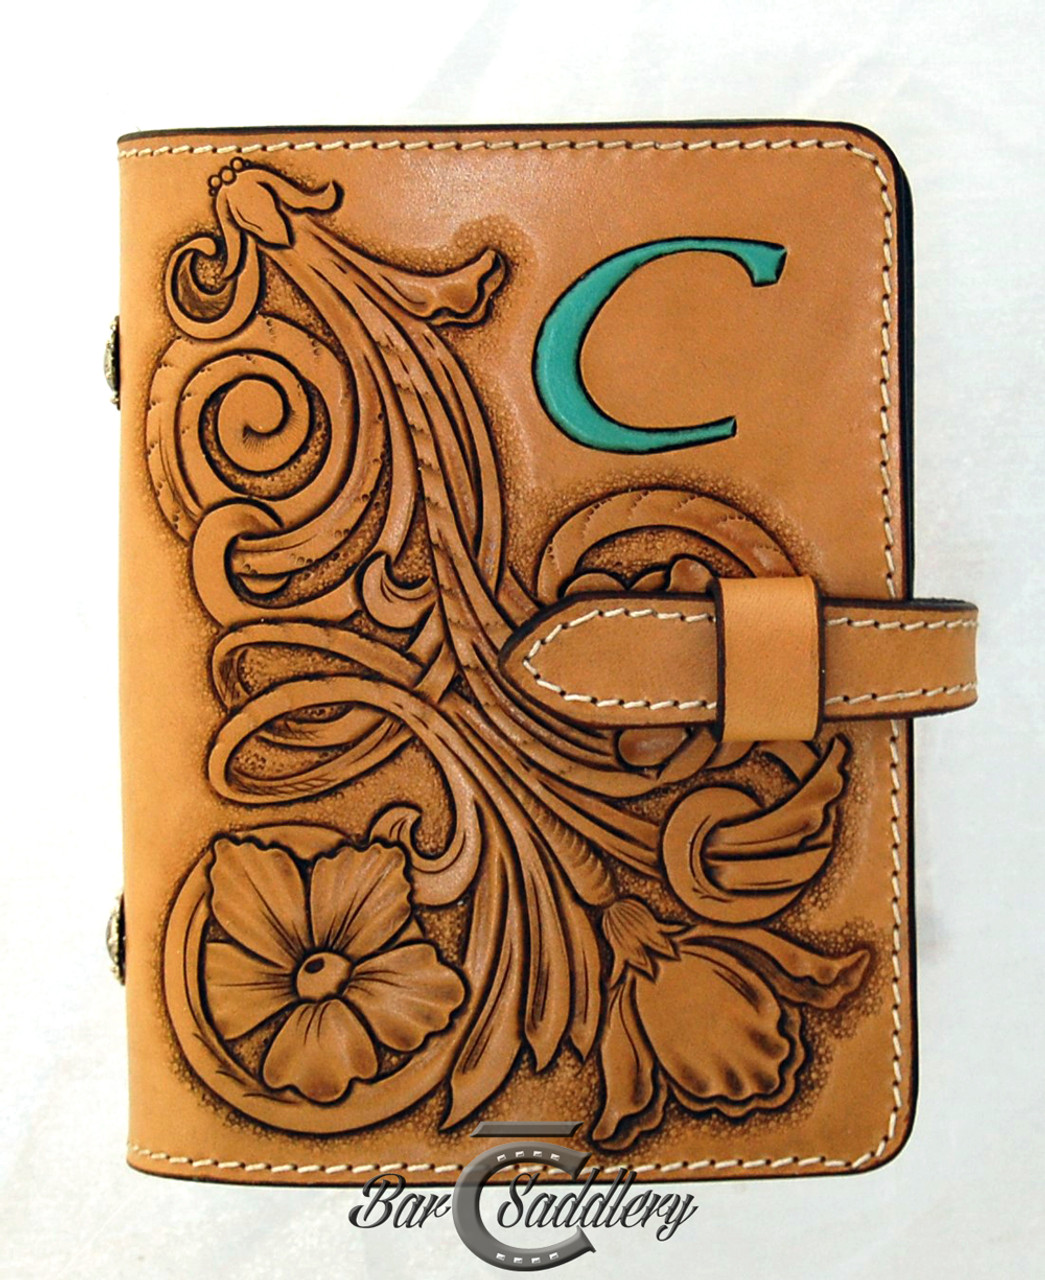 Hand Made Leather Goods - For The Home - Albums - Photo, Art & Scrapbook -  Bar C Saddlery